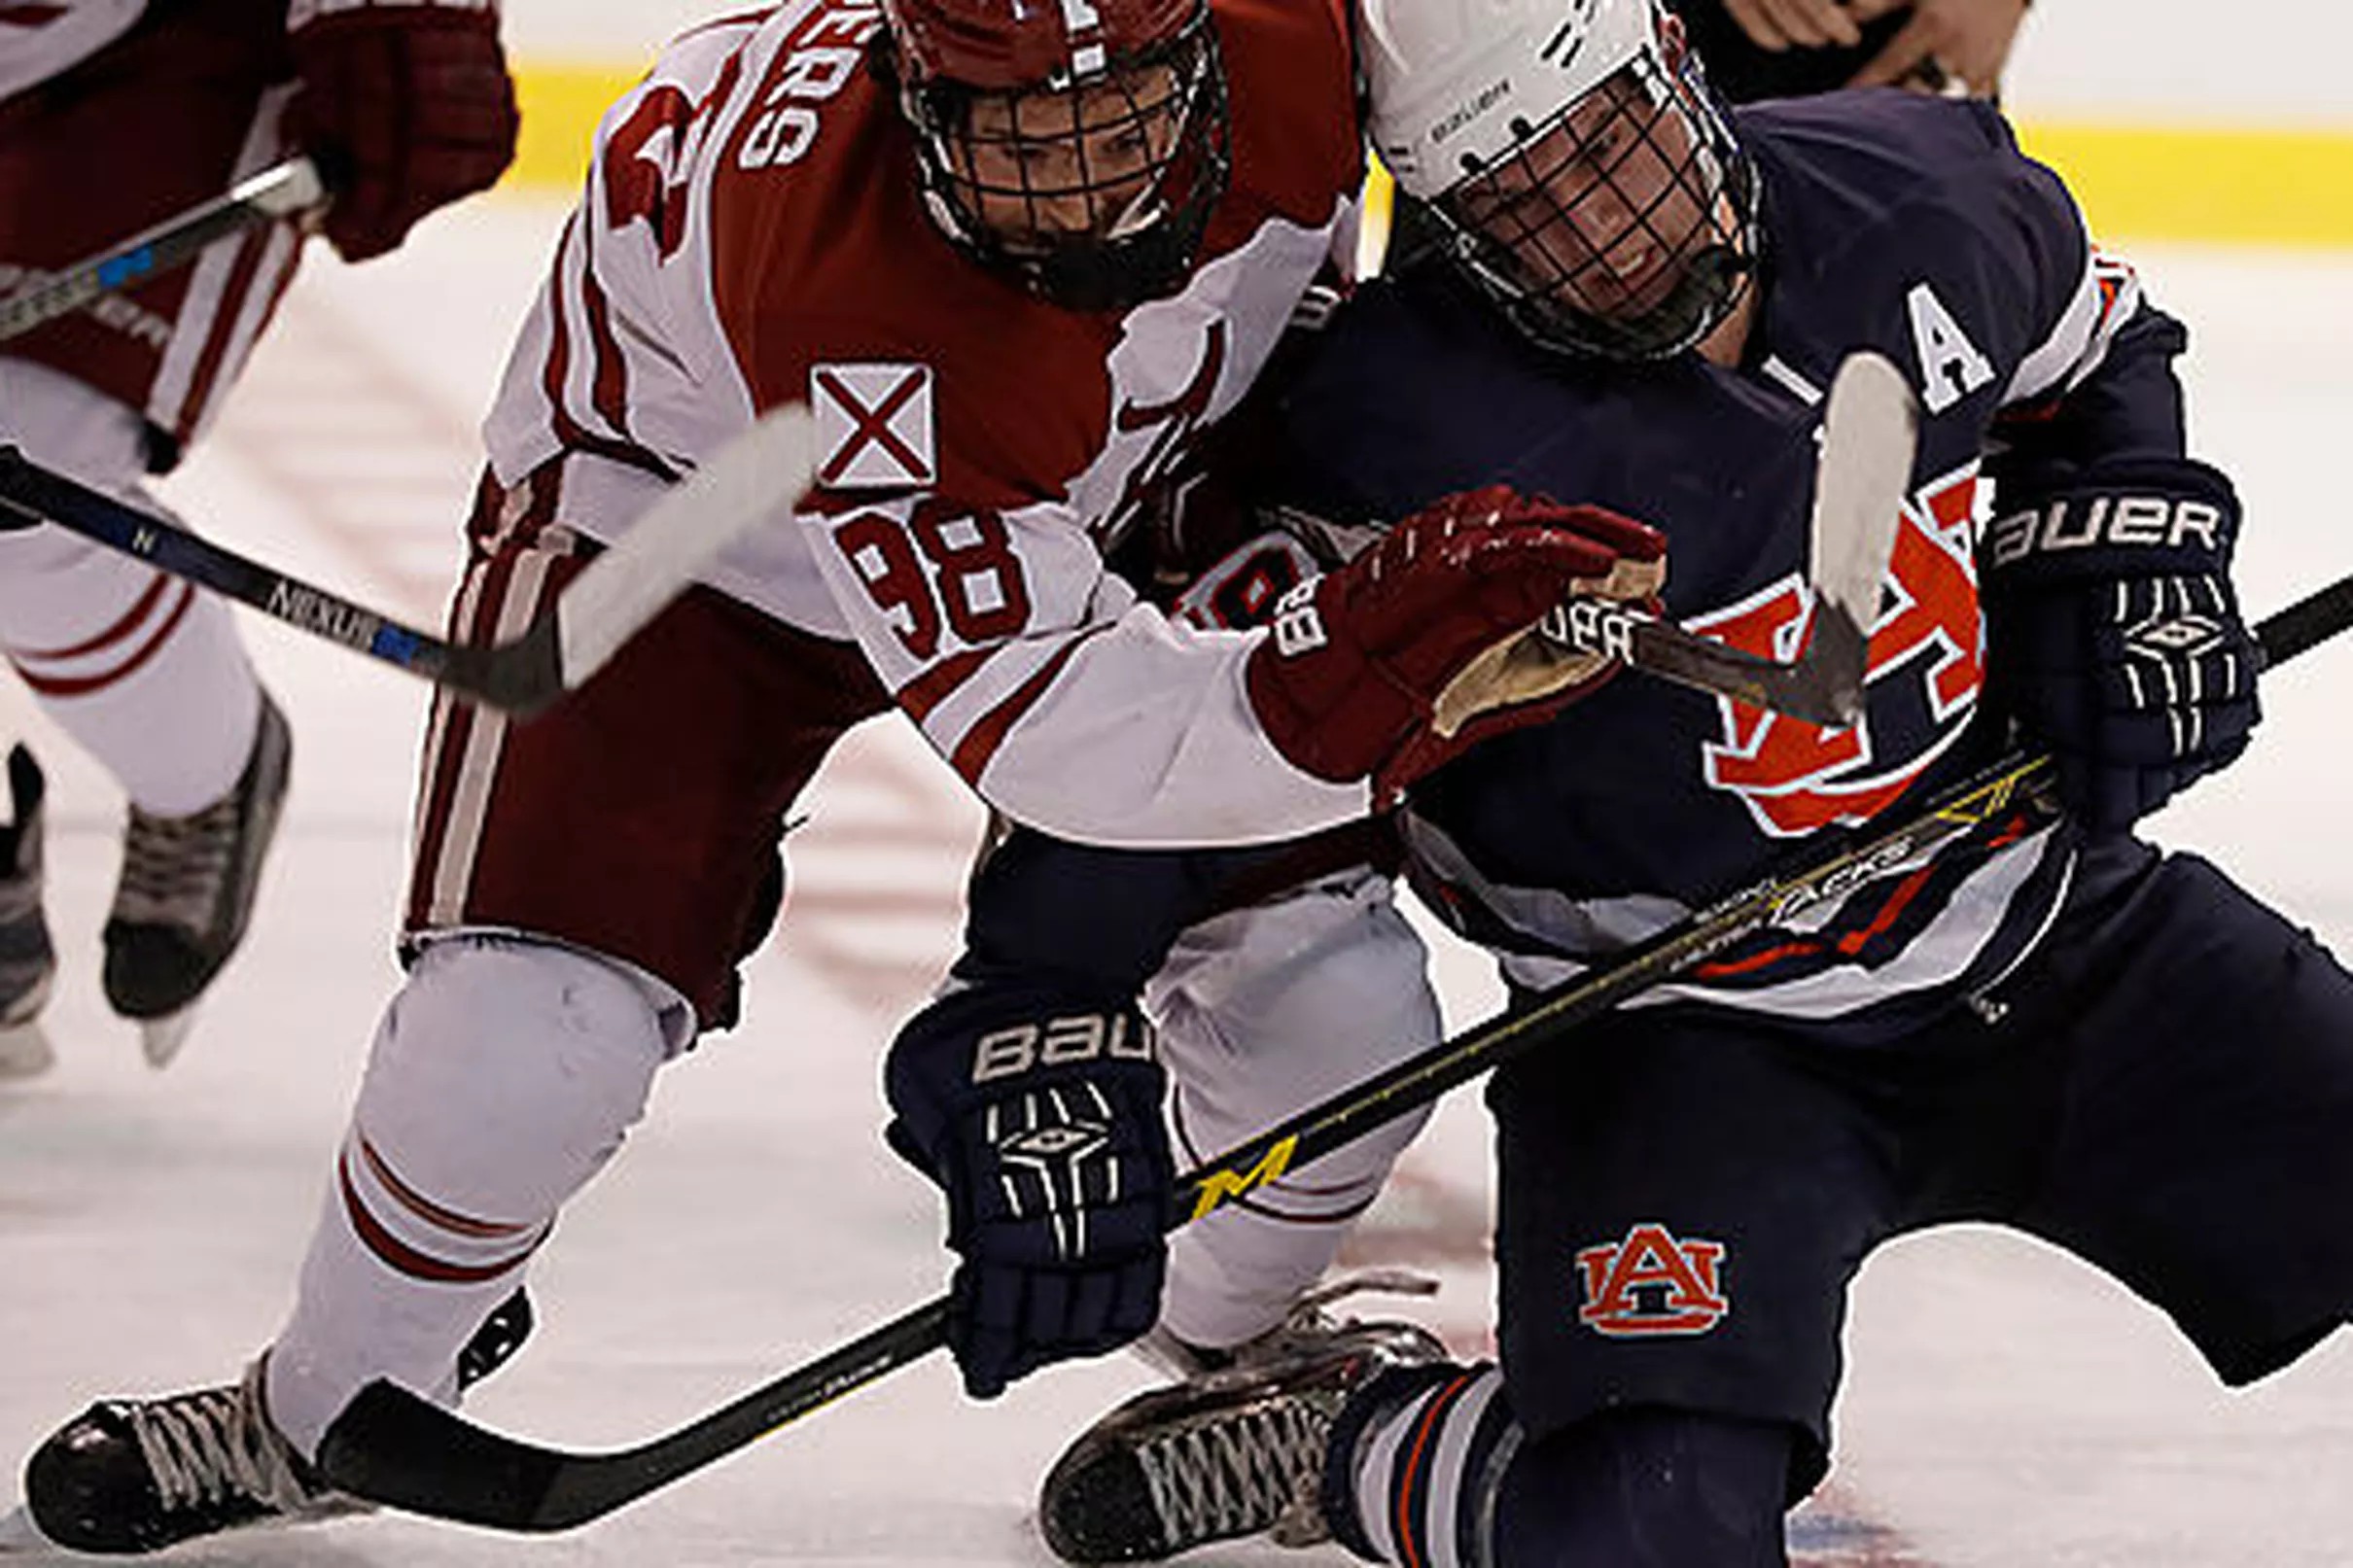 Alabama Hockey looks to remain perfect in its rivalry with Auburn